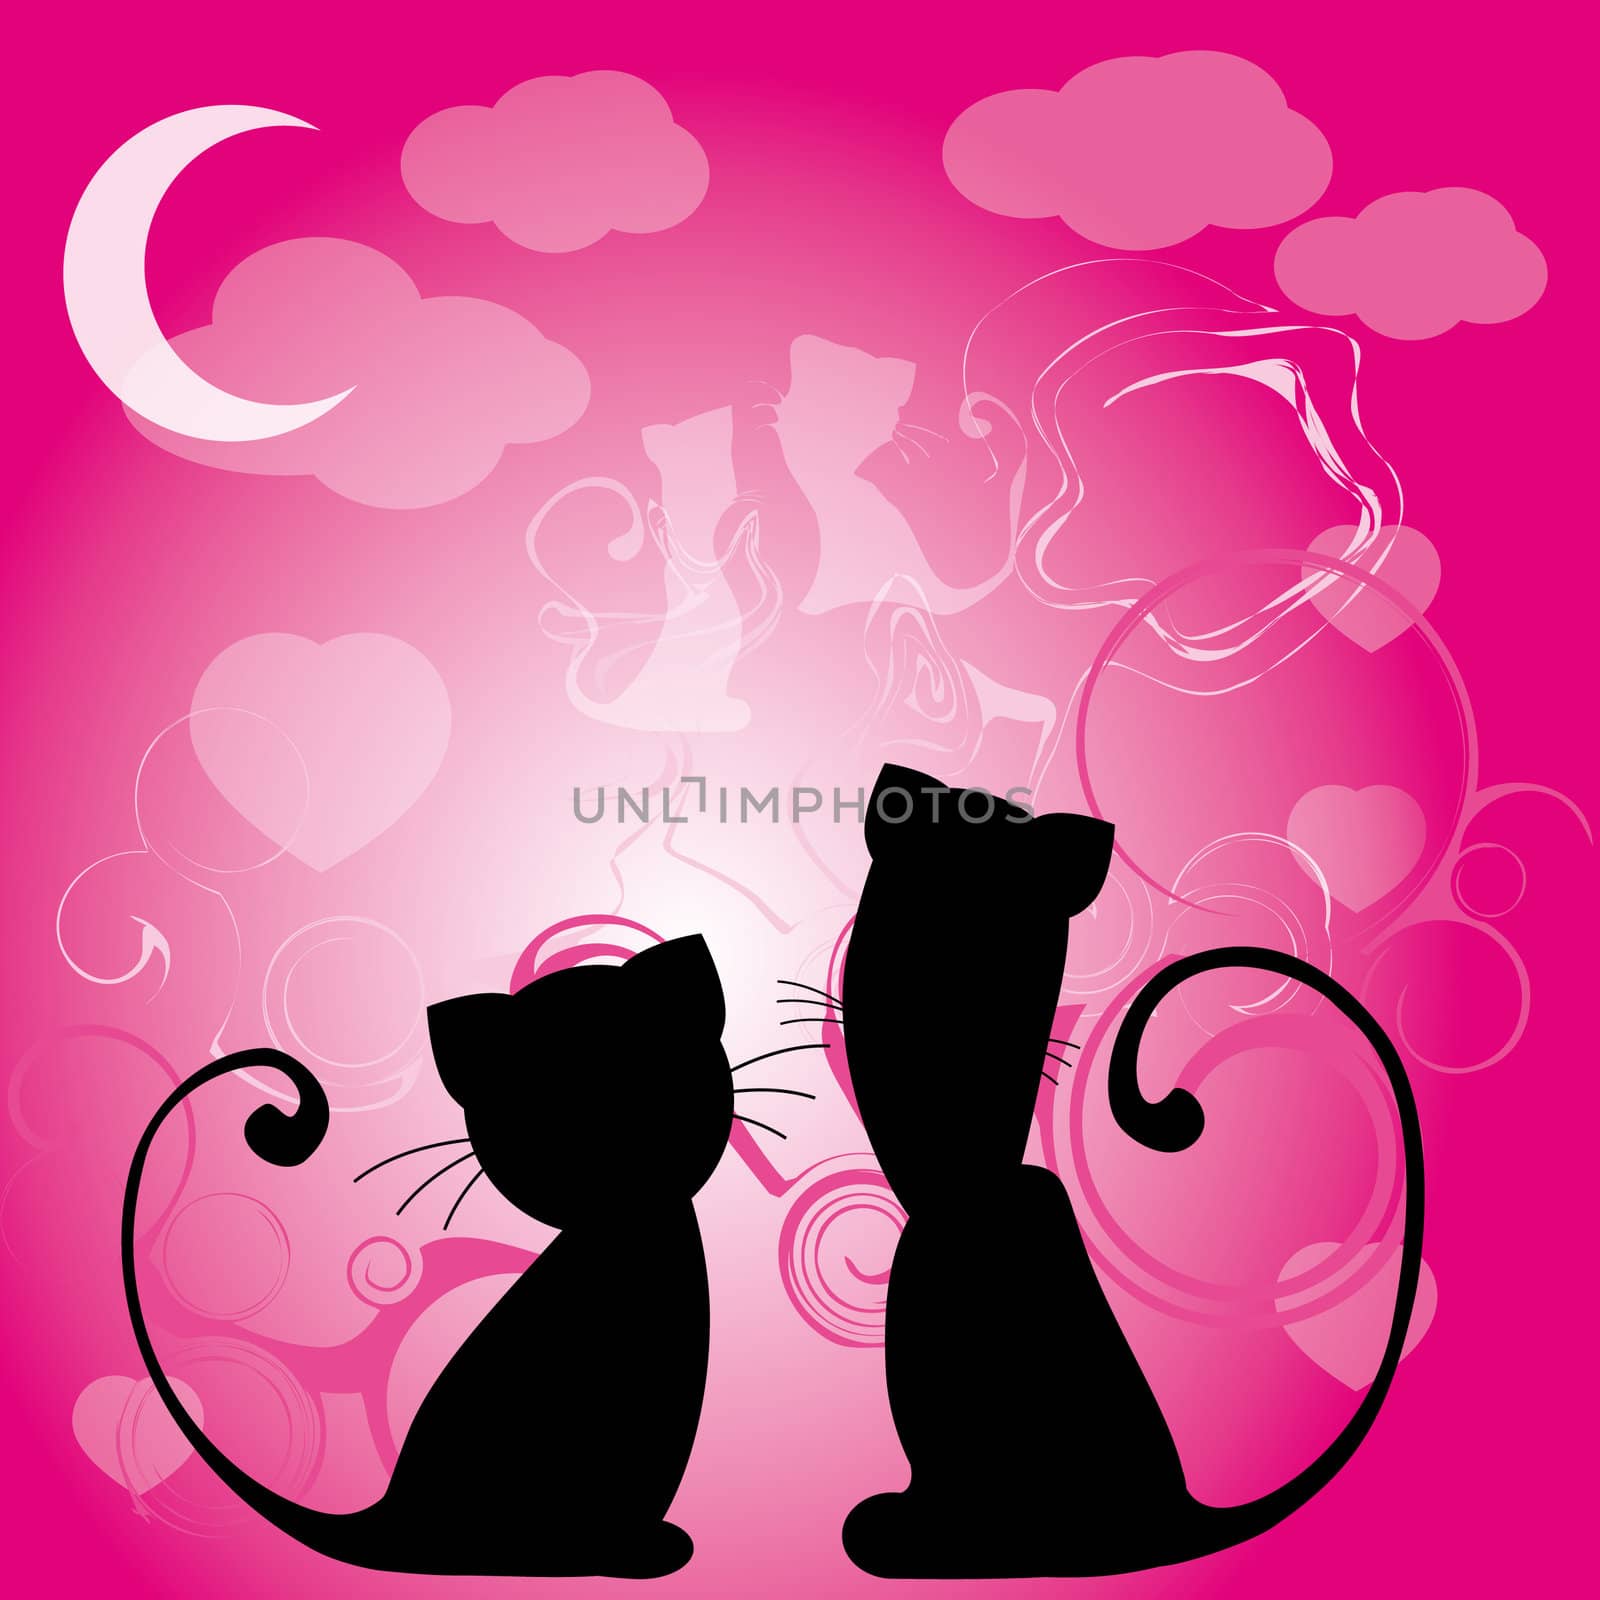 Drawing of two black cats on a pink abstract background